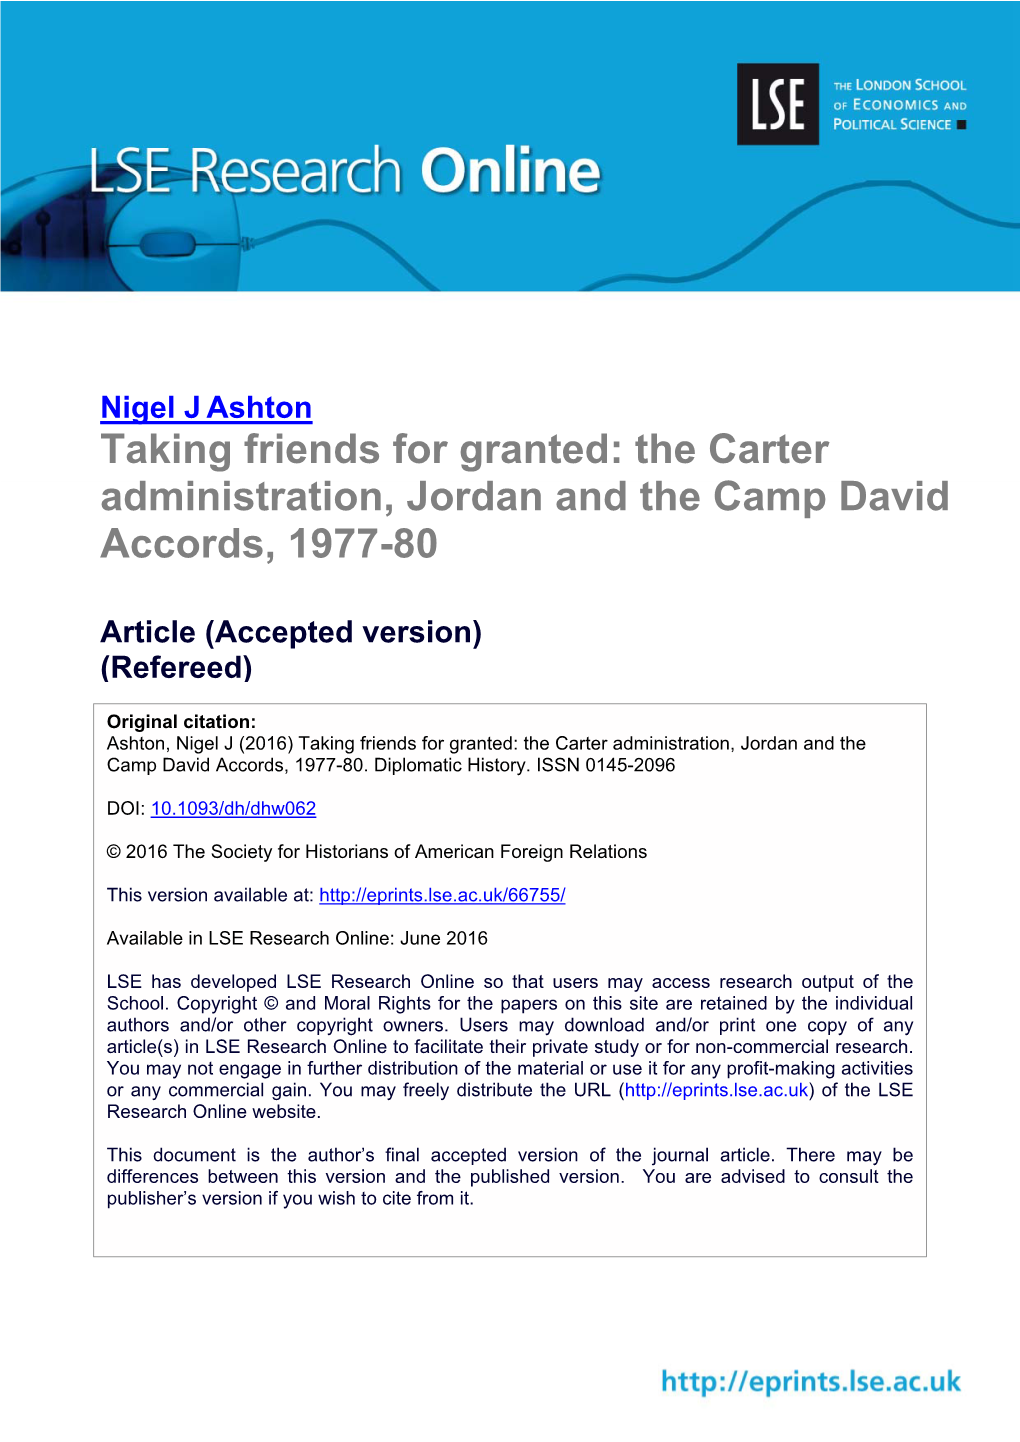 Taking Friends for Granted: the Carter Administration, Jordan and the Camp David Accords, 1977-80